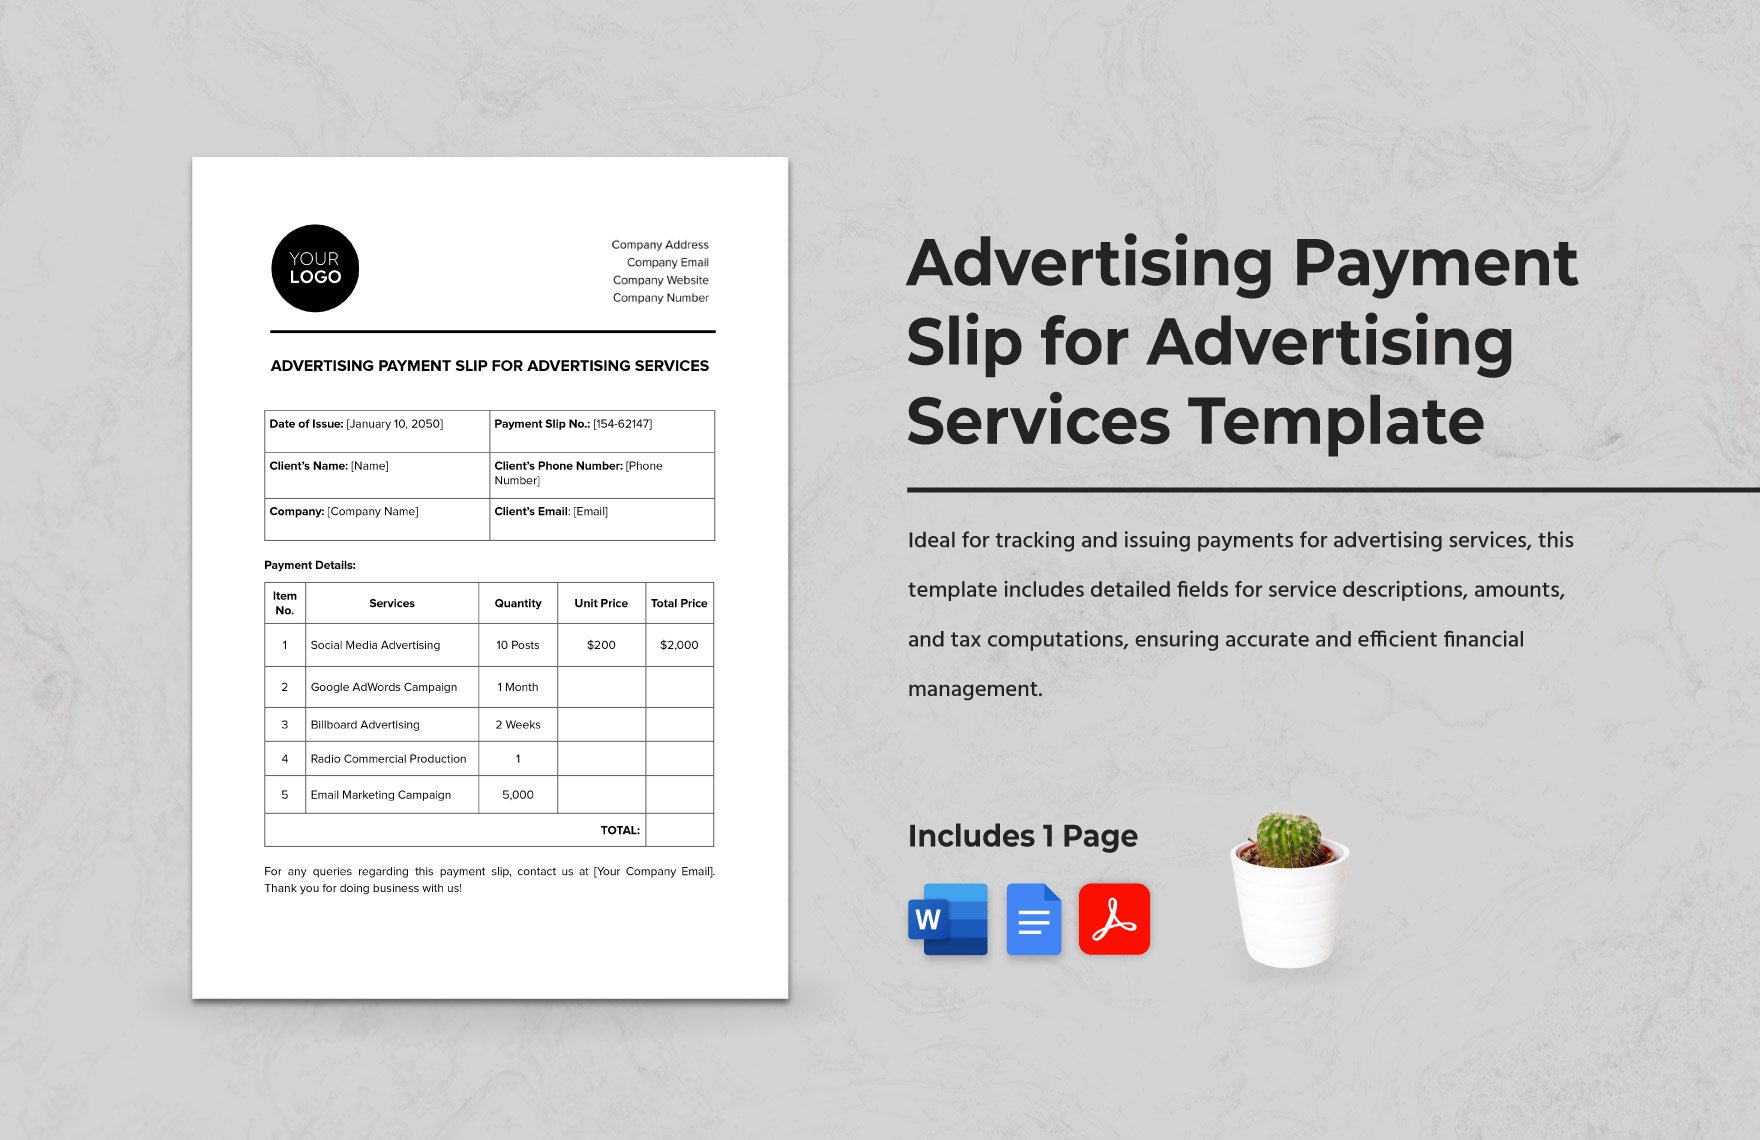 Advertising Payment Slip for Advertising Services Template in Word, Google Docs, PDF